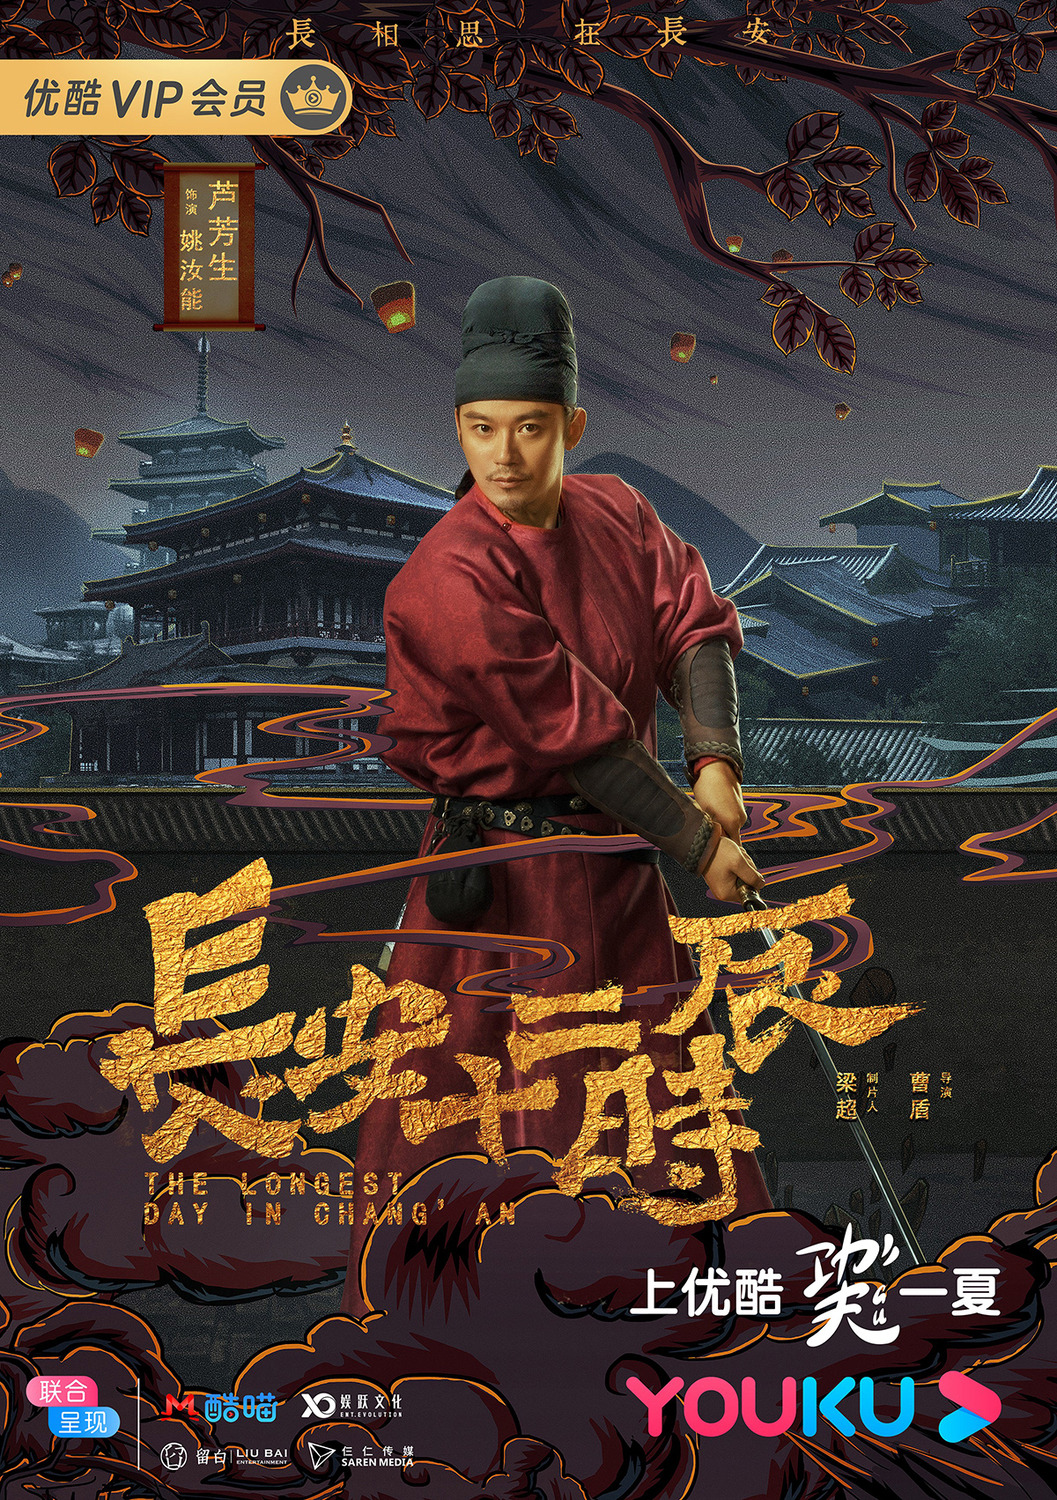 Extra Large TV Poster Image for Chang'an shi er shi chen (#8 of 18)